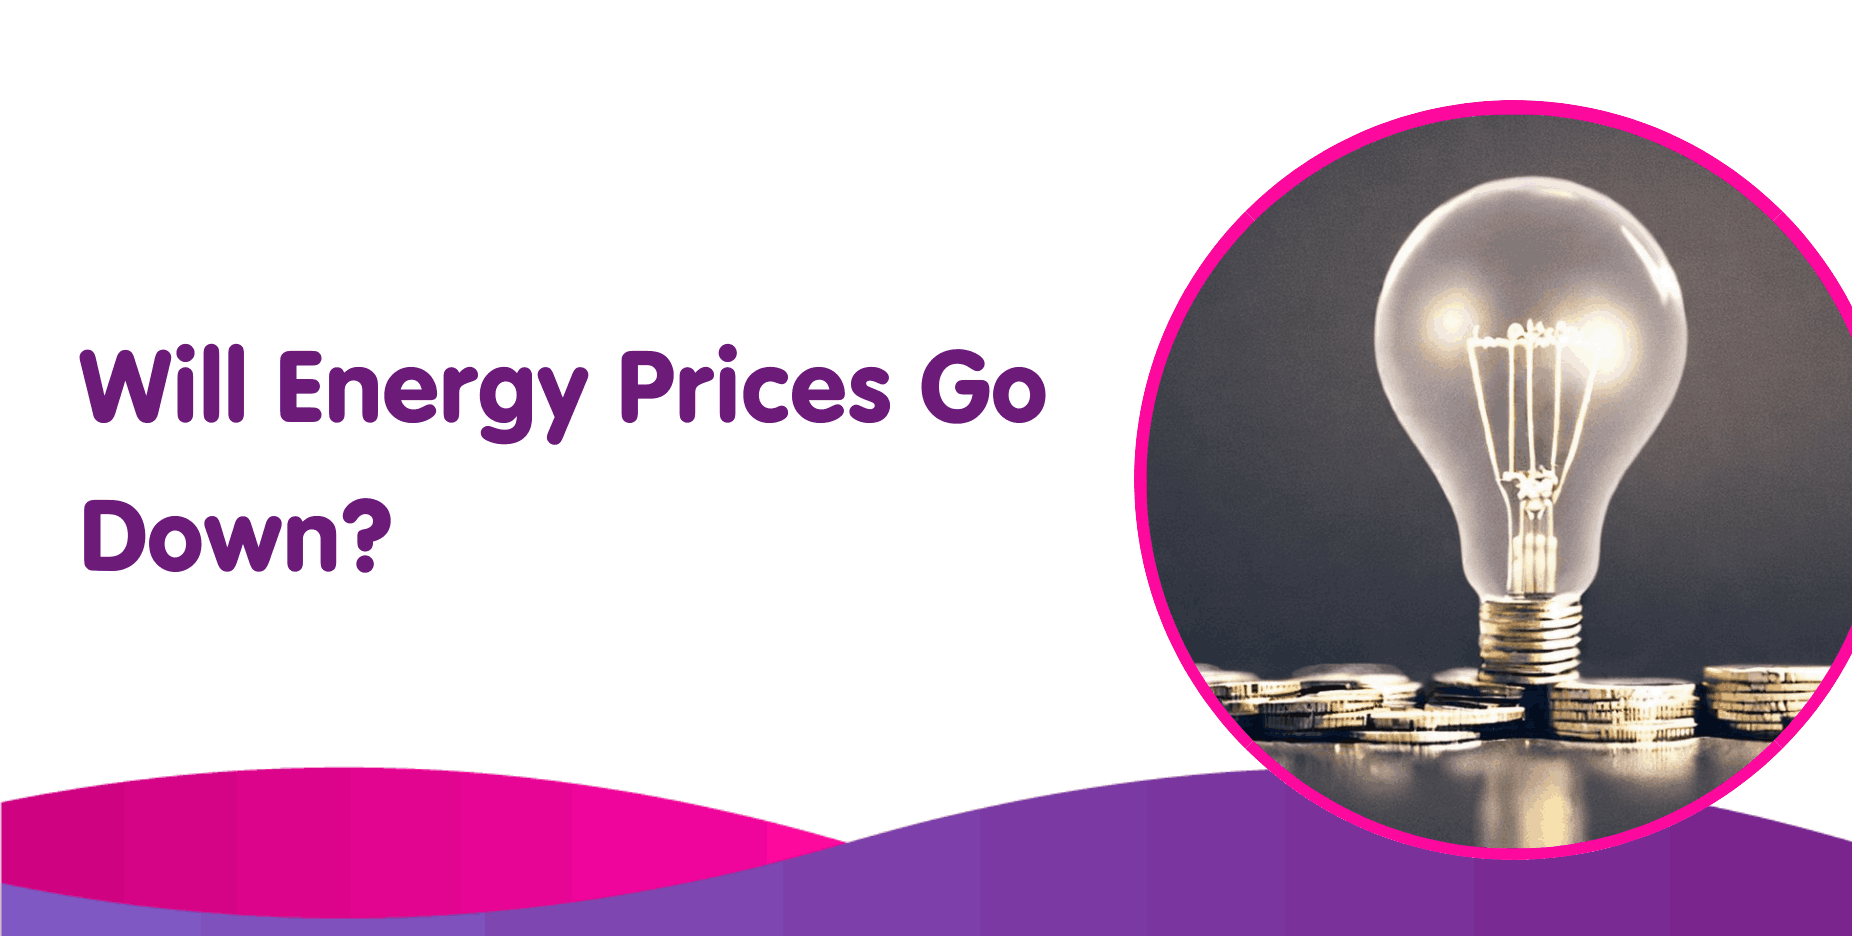 Will Energy Prices Go Down